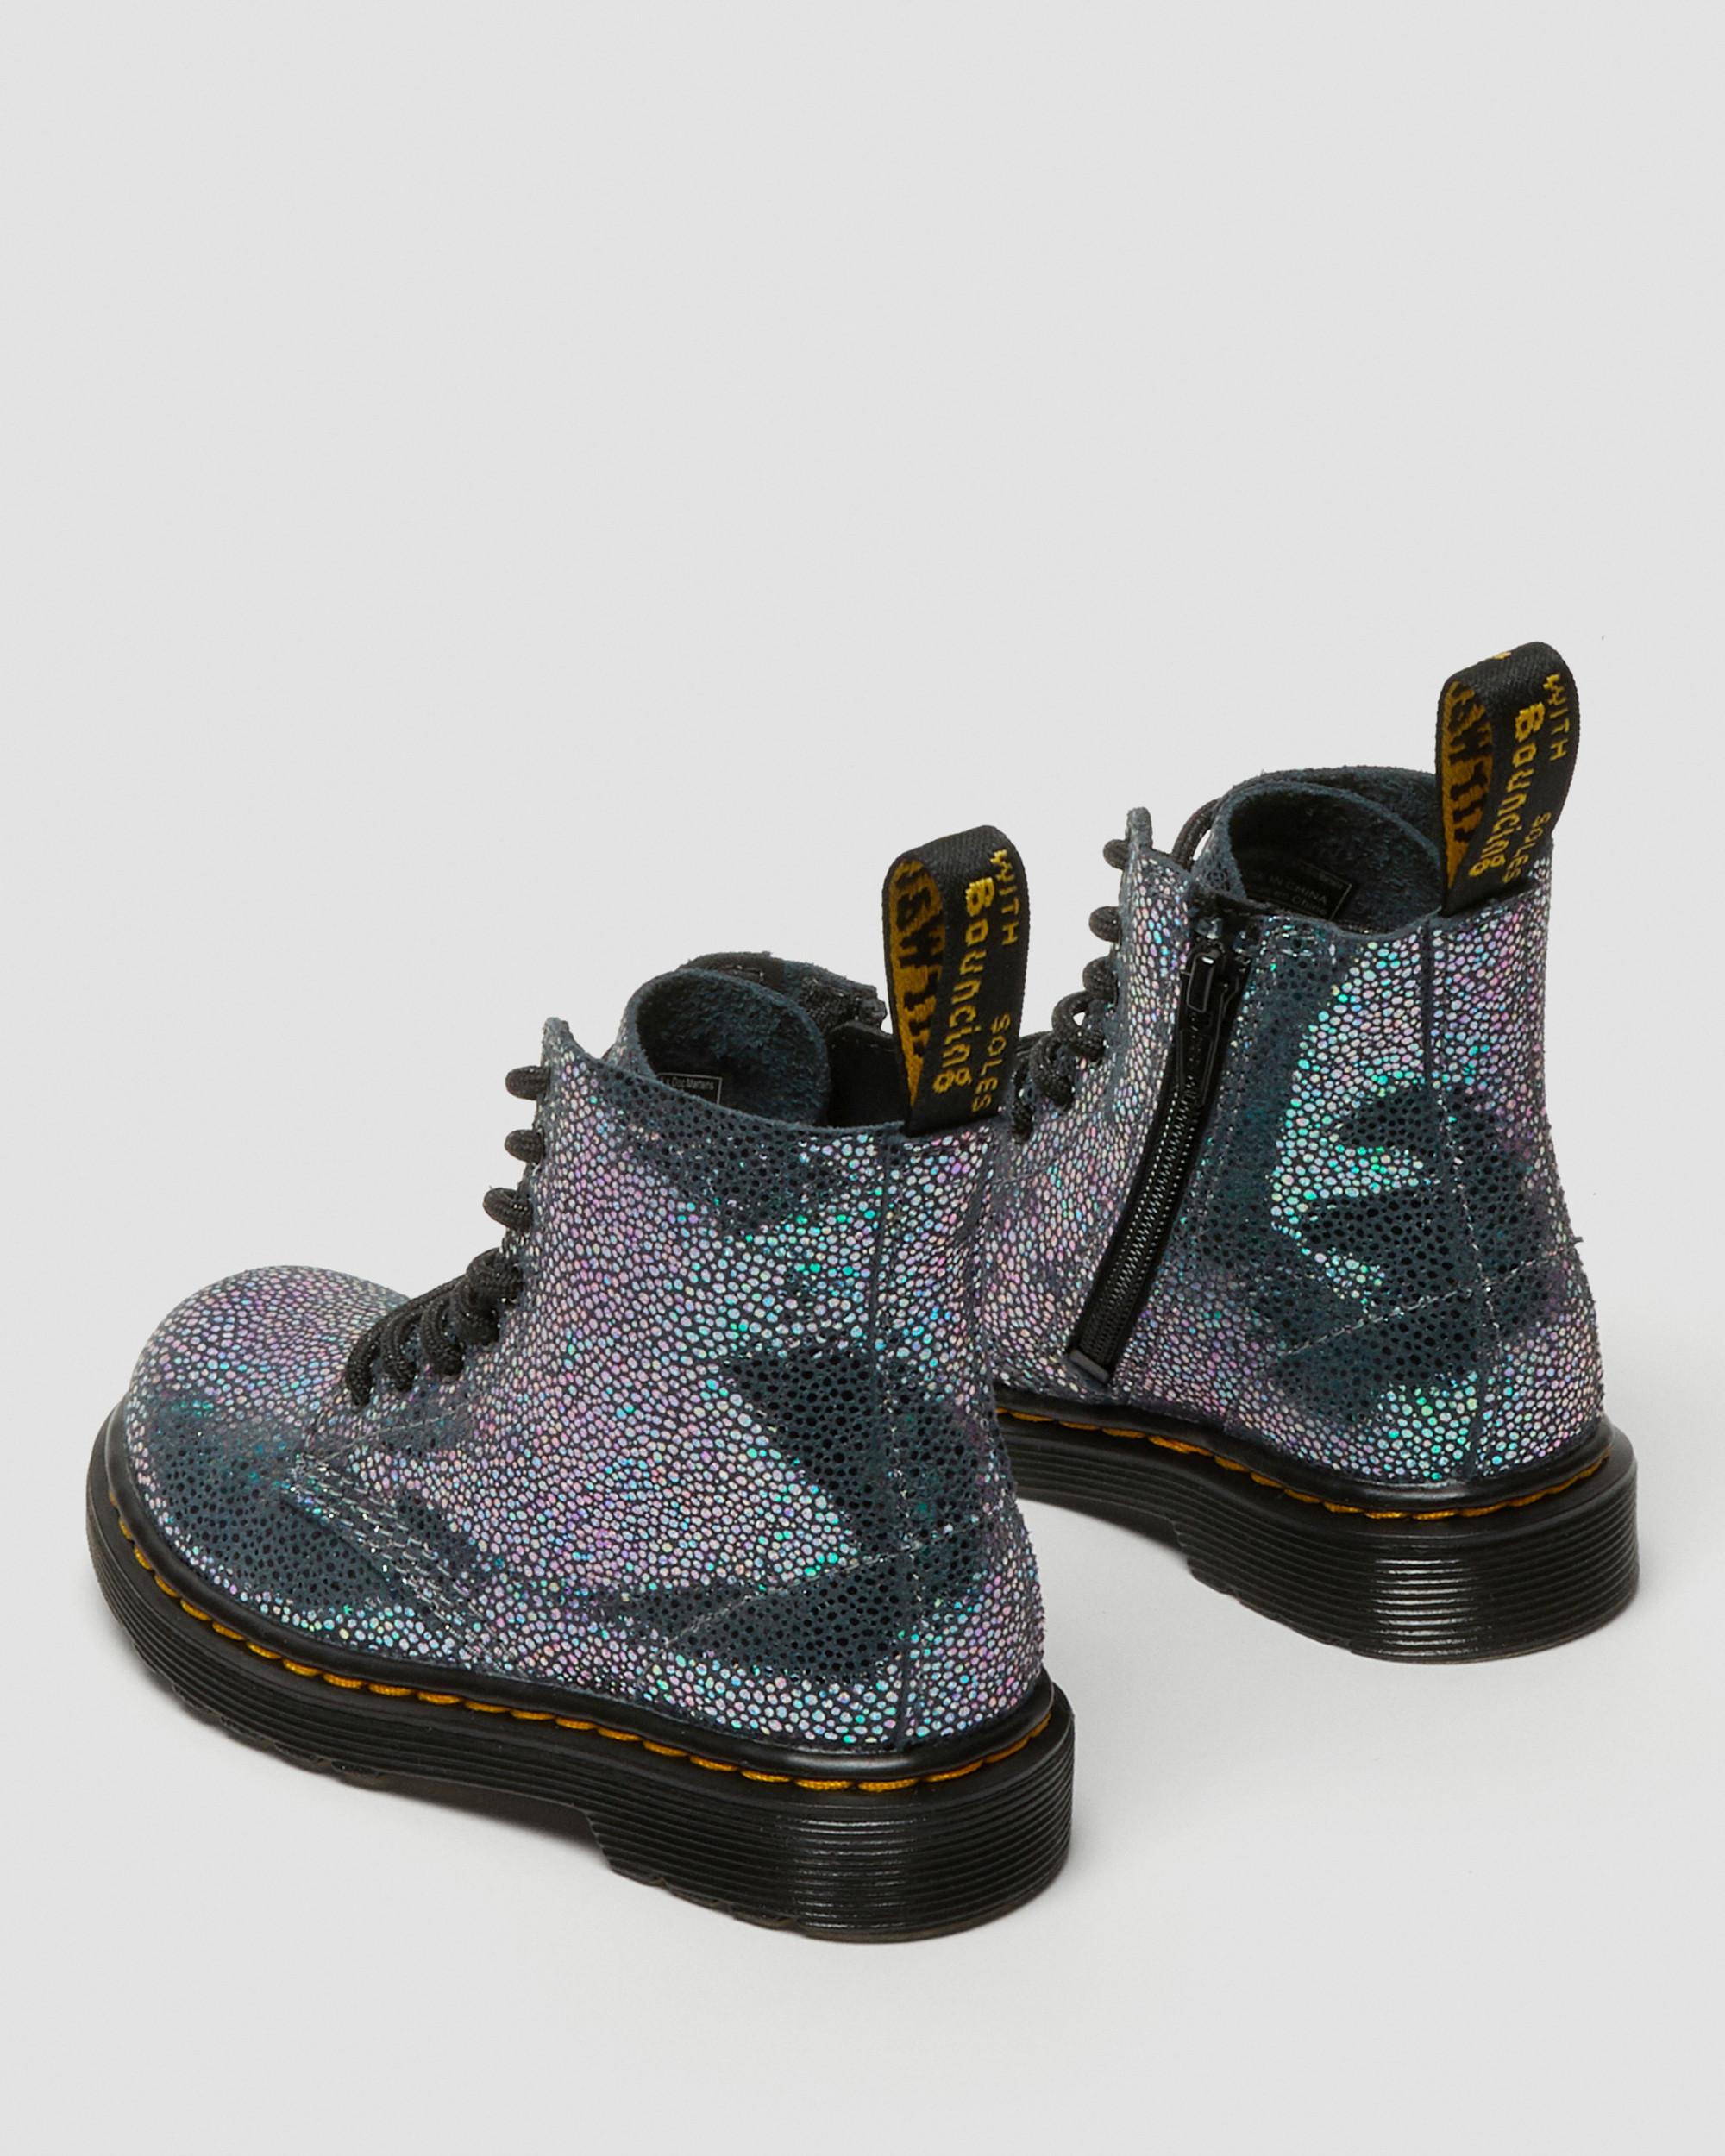 Toddler 1460 Pascal Iridescent Lace Up Boots in Metallic